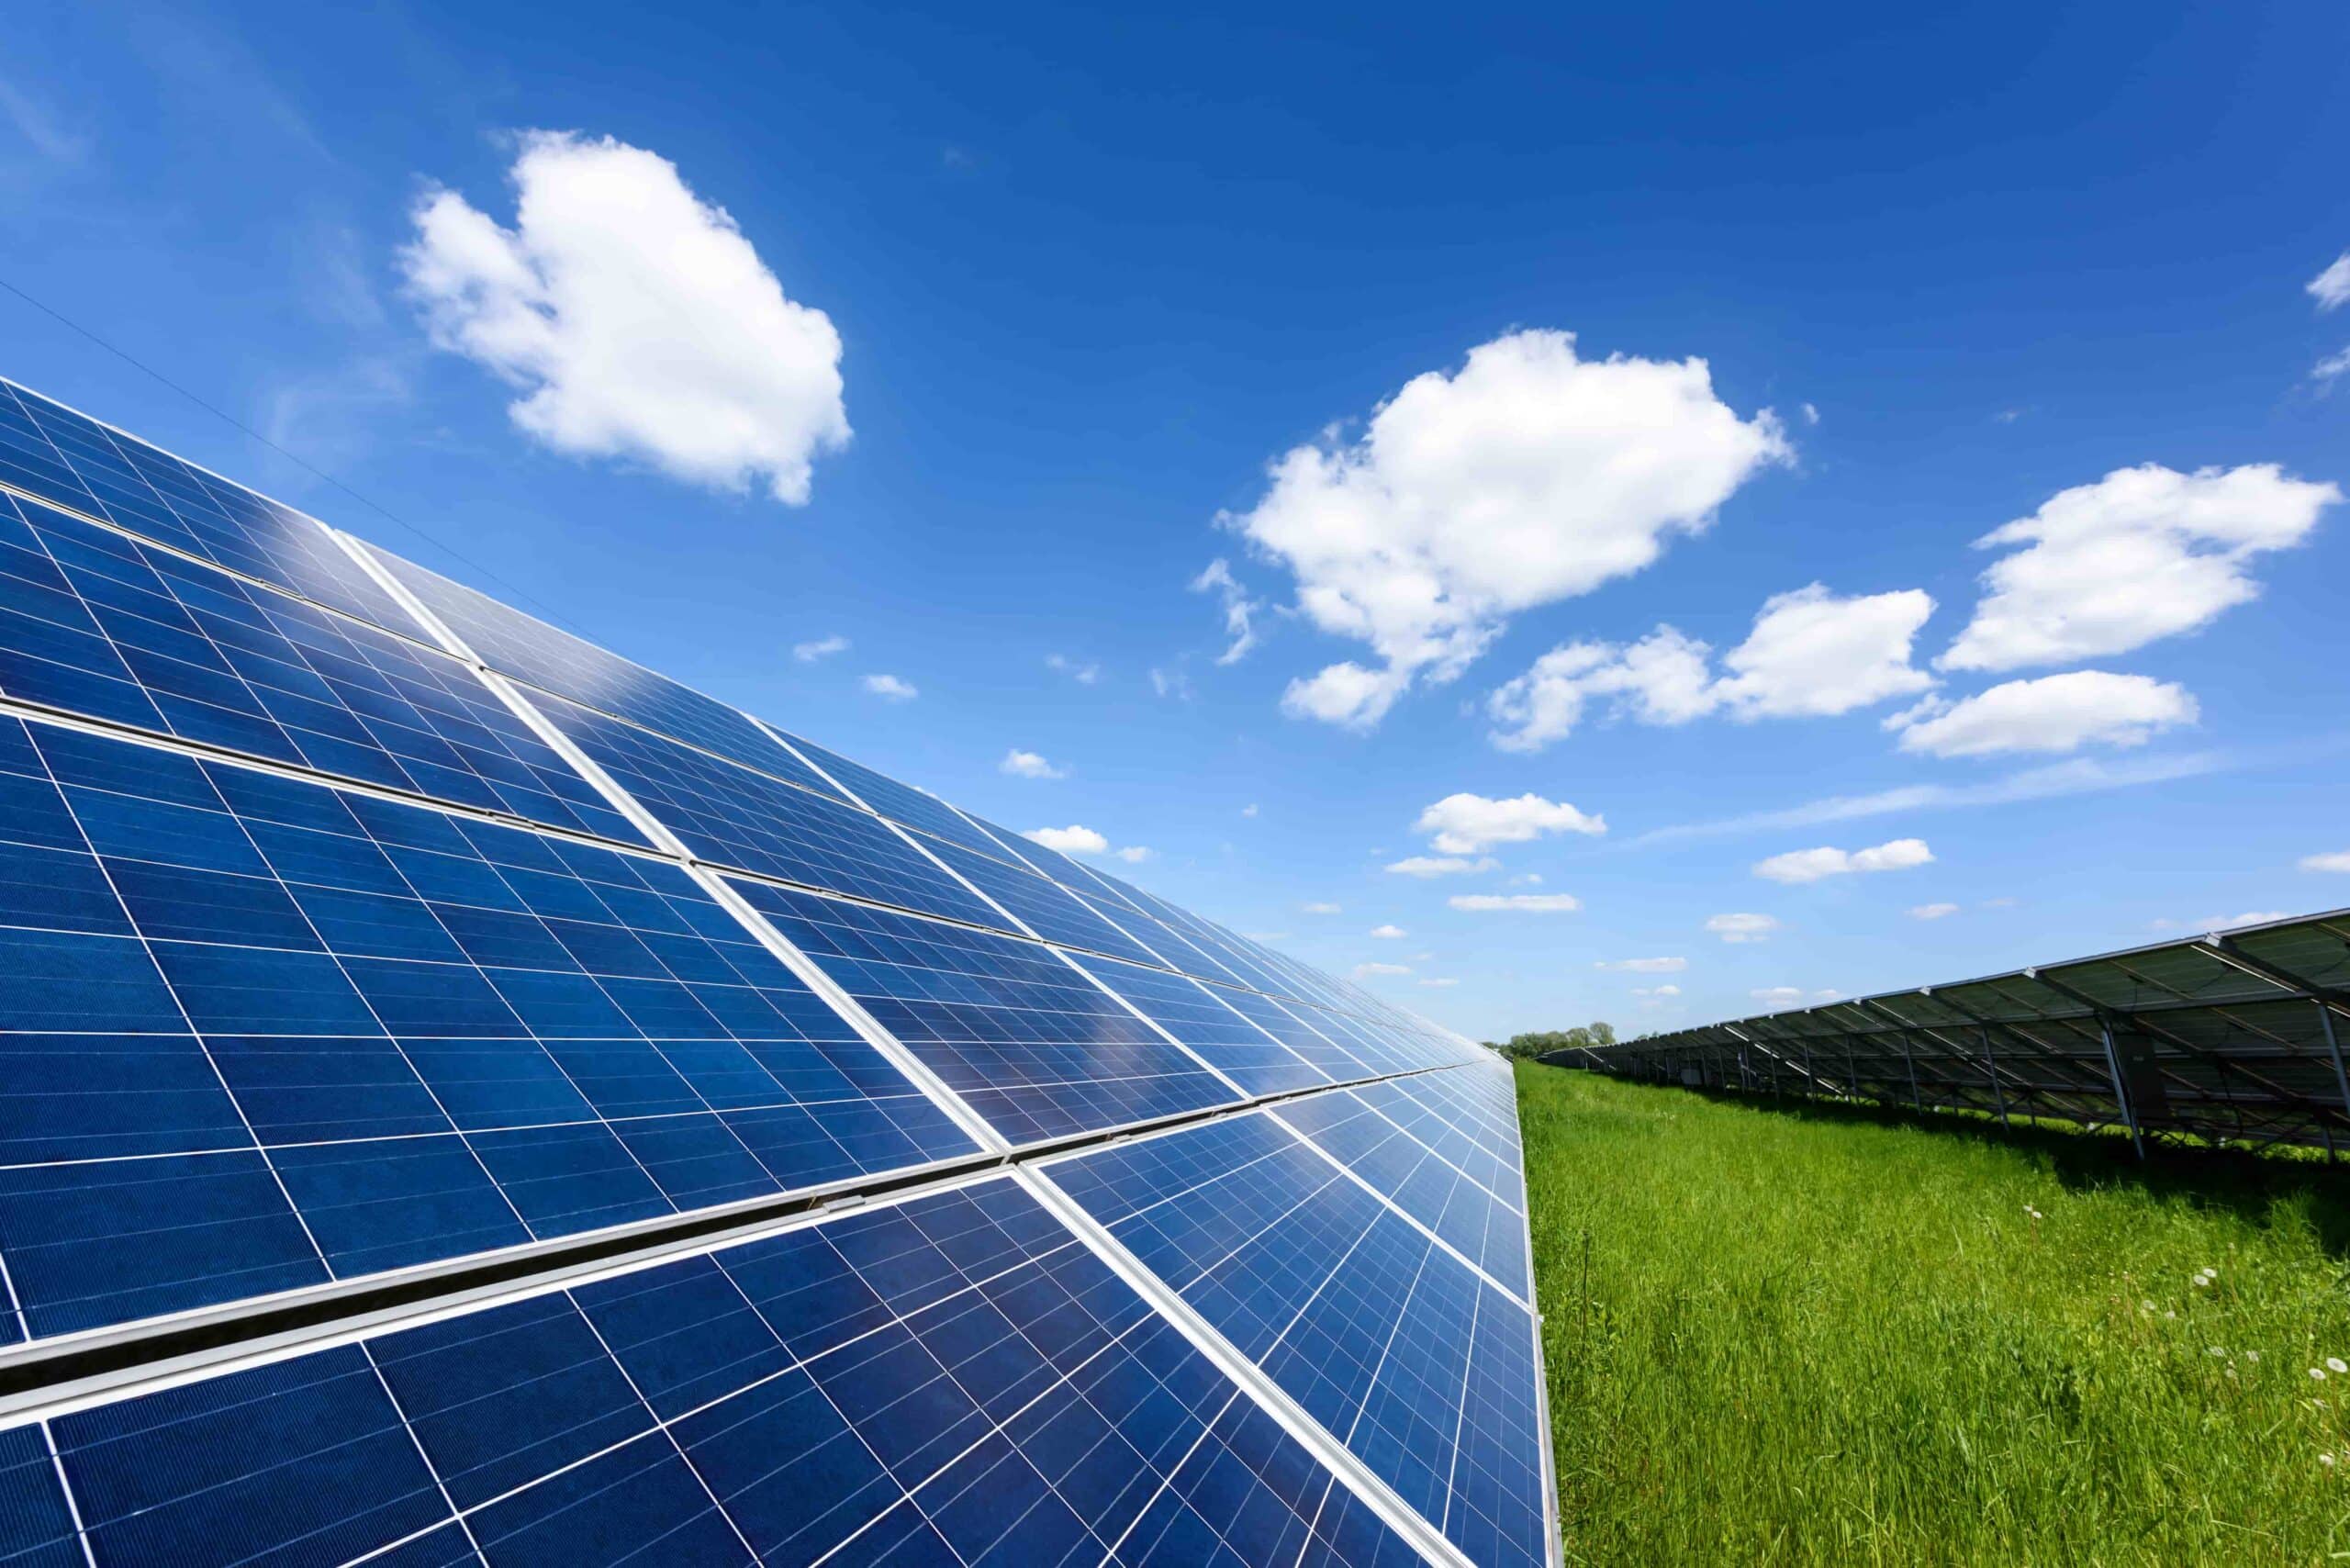 The Benefits of Installing Solar PV Panels for Your Home or Business